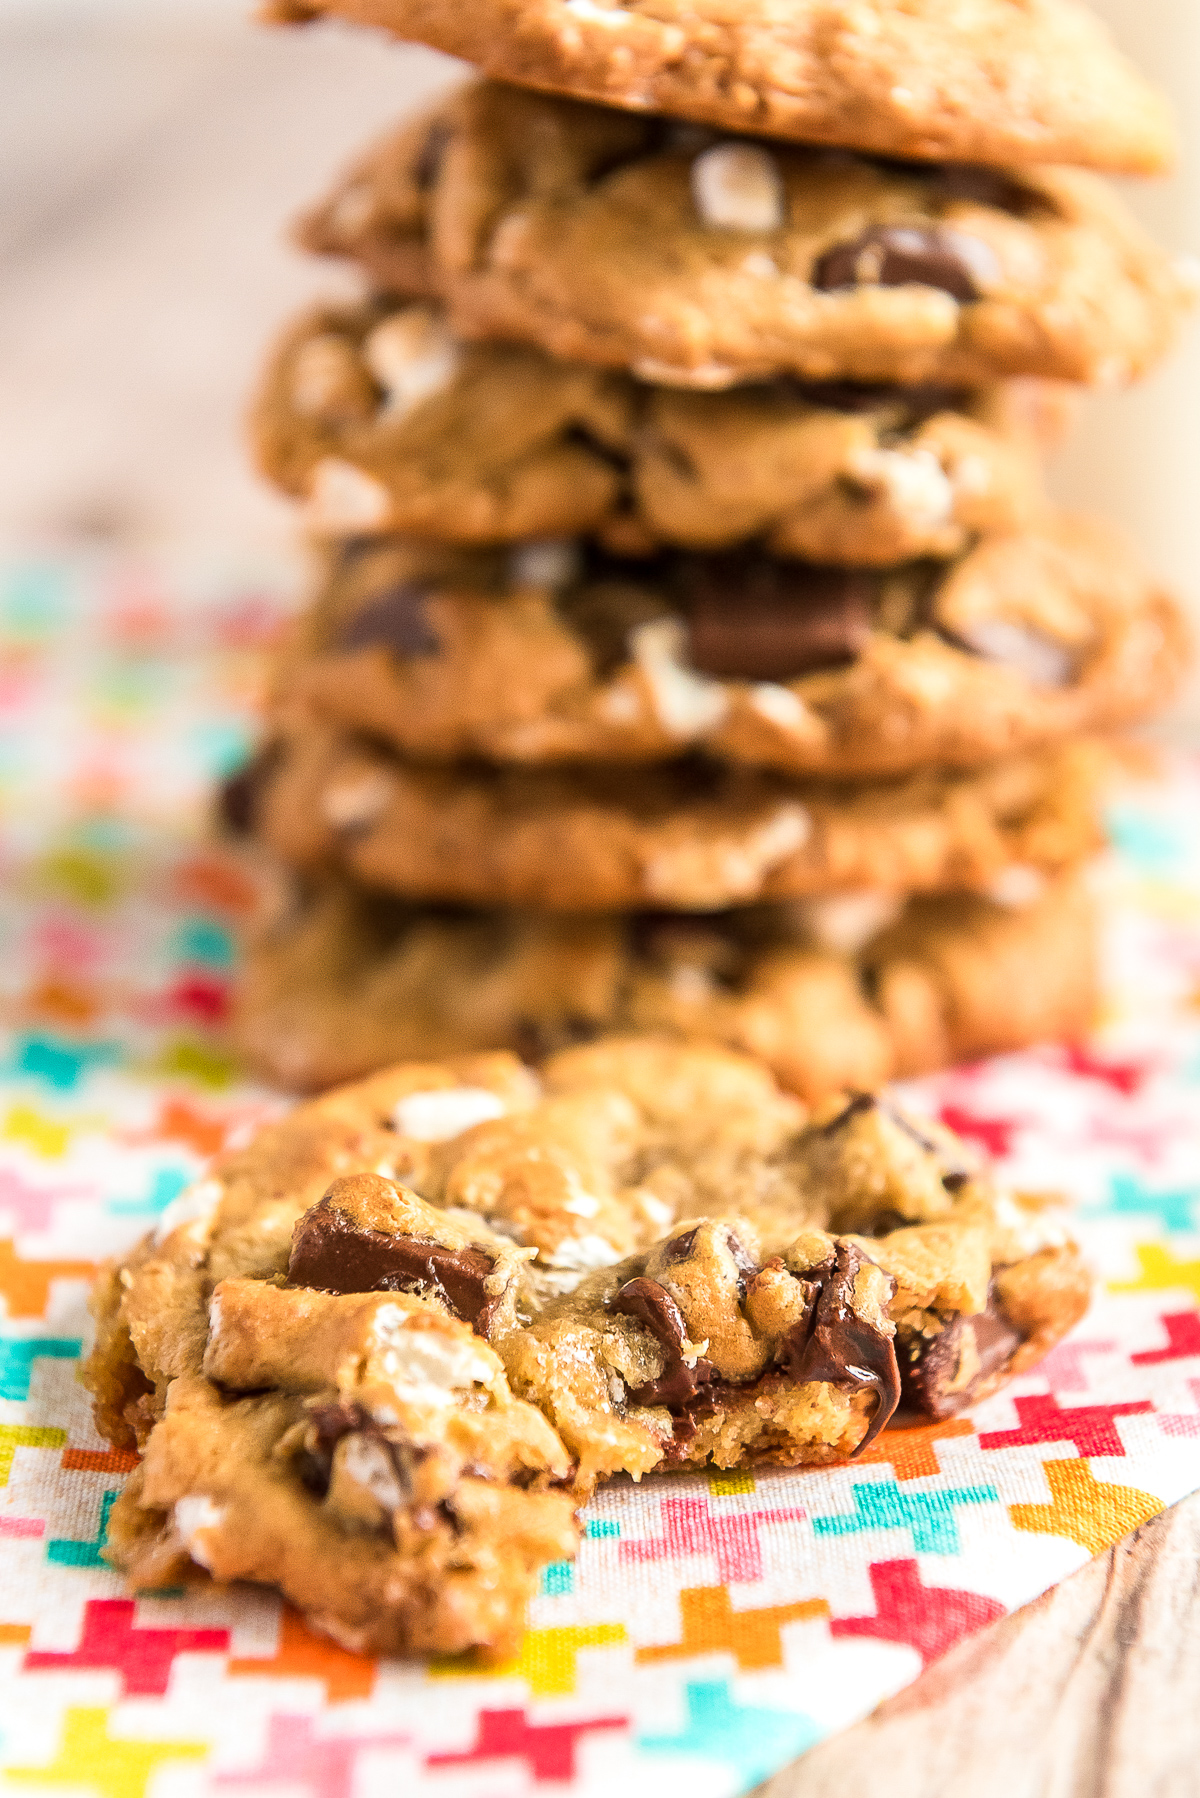 Stack of cookies with one cookie in the foreground with a bite taken out of it.